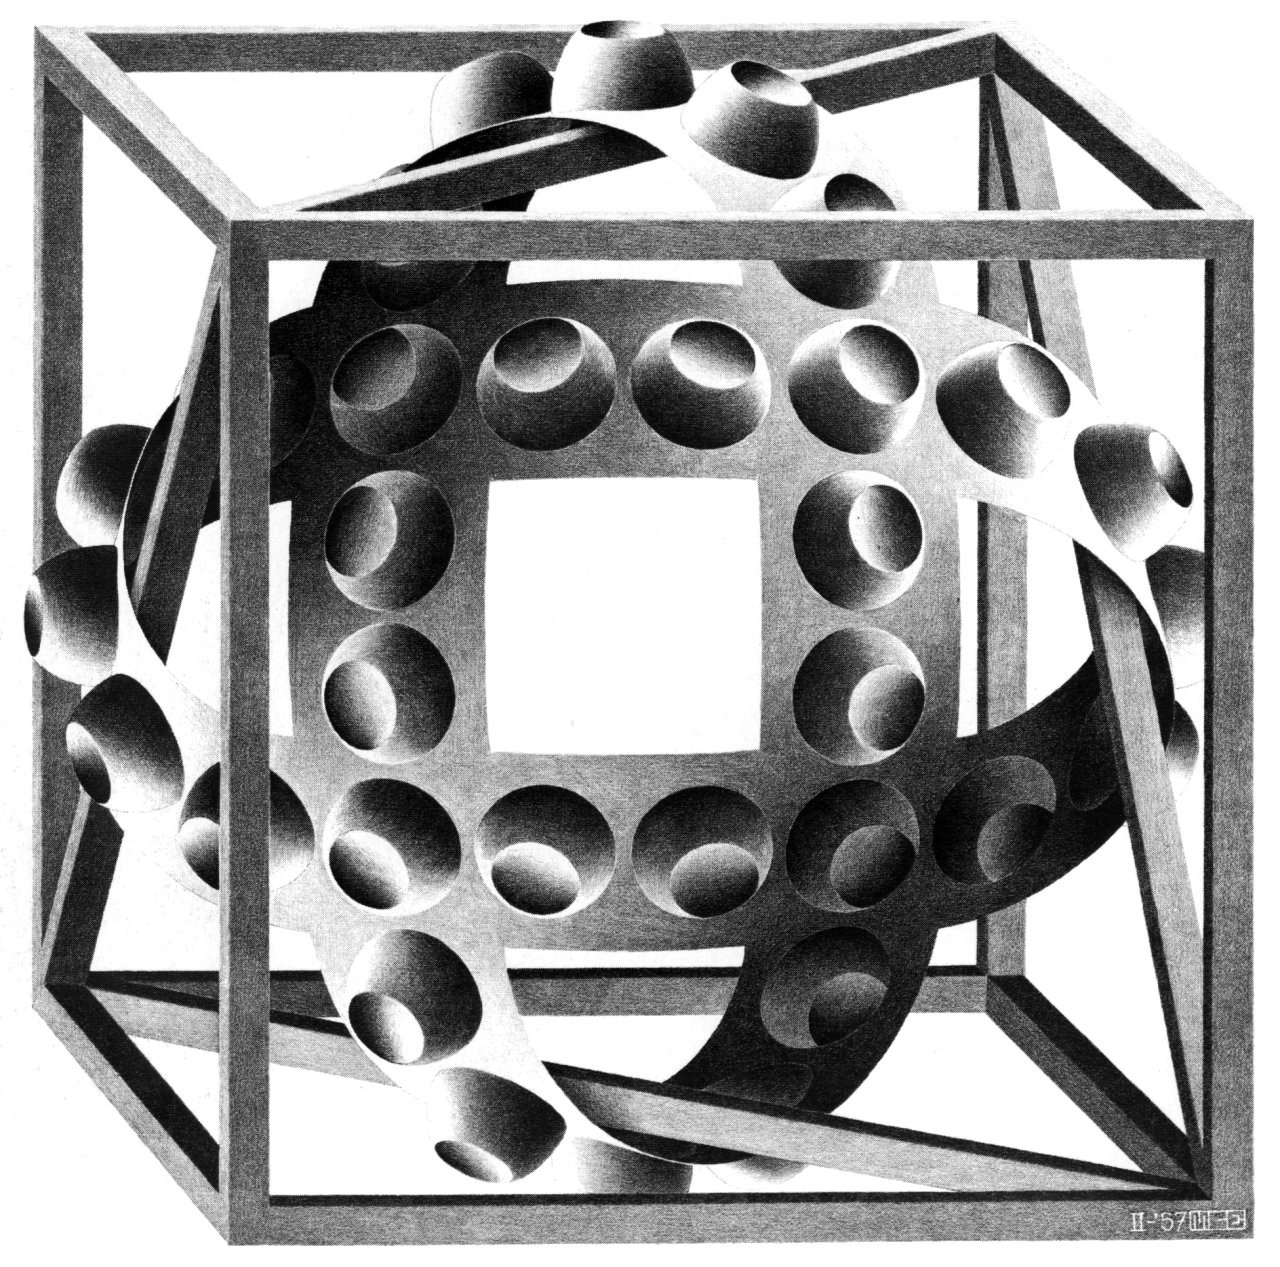 Cube with Magic Ribbons, 1957 - M.C. Escher - WikiArt.org